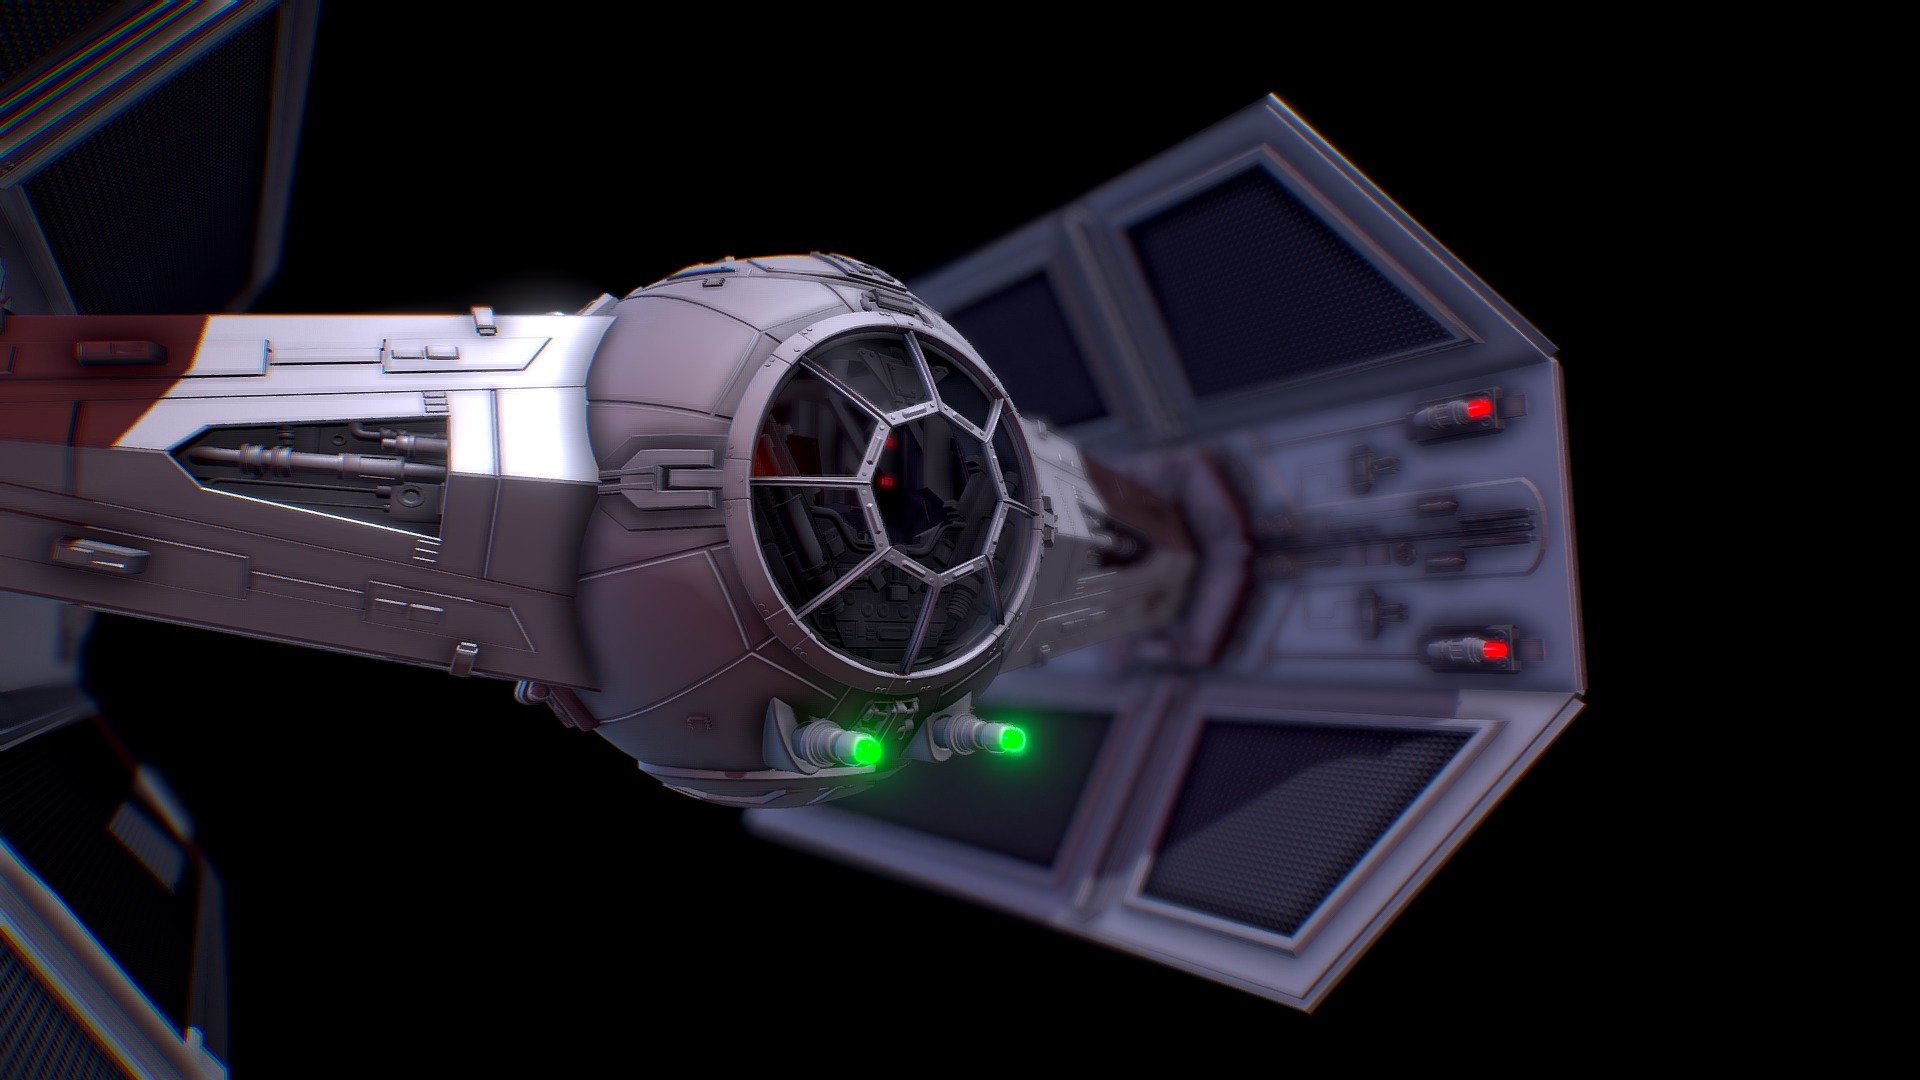 I try to make my own 3d model of the TIE fighter of Darth vader - TIE ADVANCED X1 (Darth Vader) - 3D model by vbrush 3d model